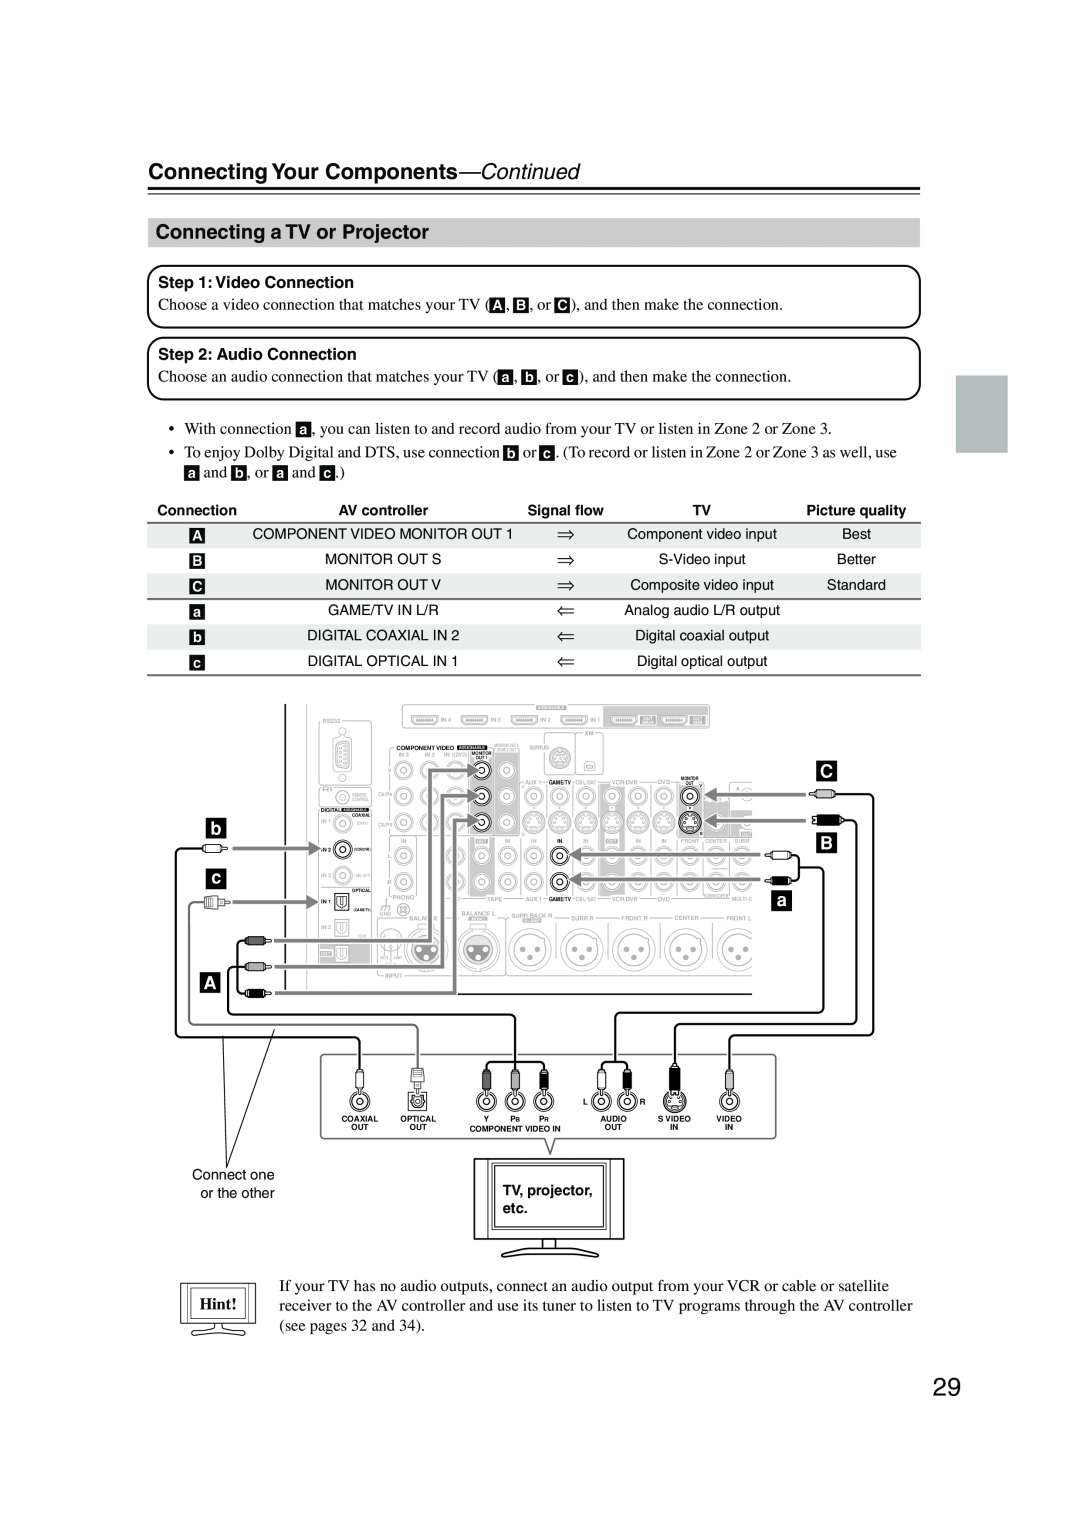 Onkyo PR-SC885 instruction manual Connecting a TV or Projector, b c A, Connecting Your Components—Continued, Hint 